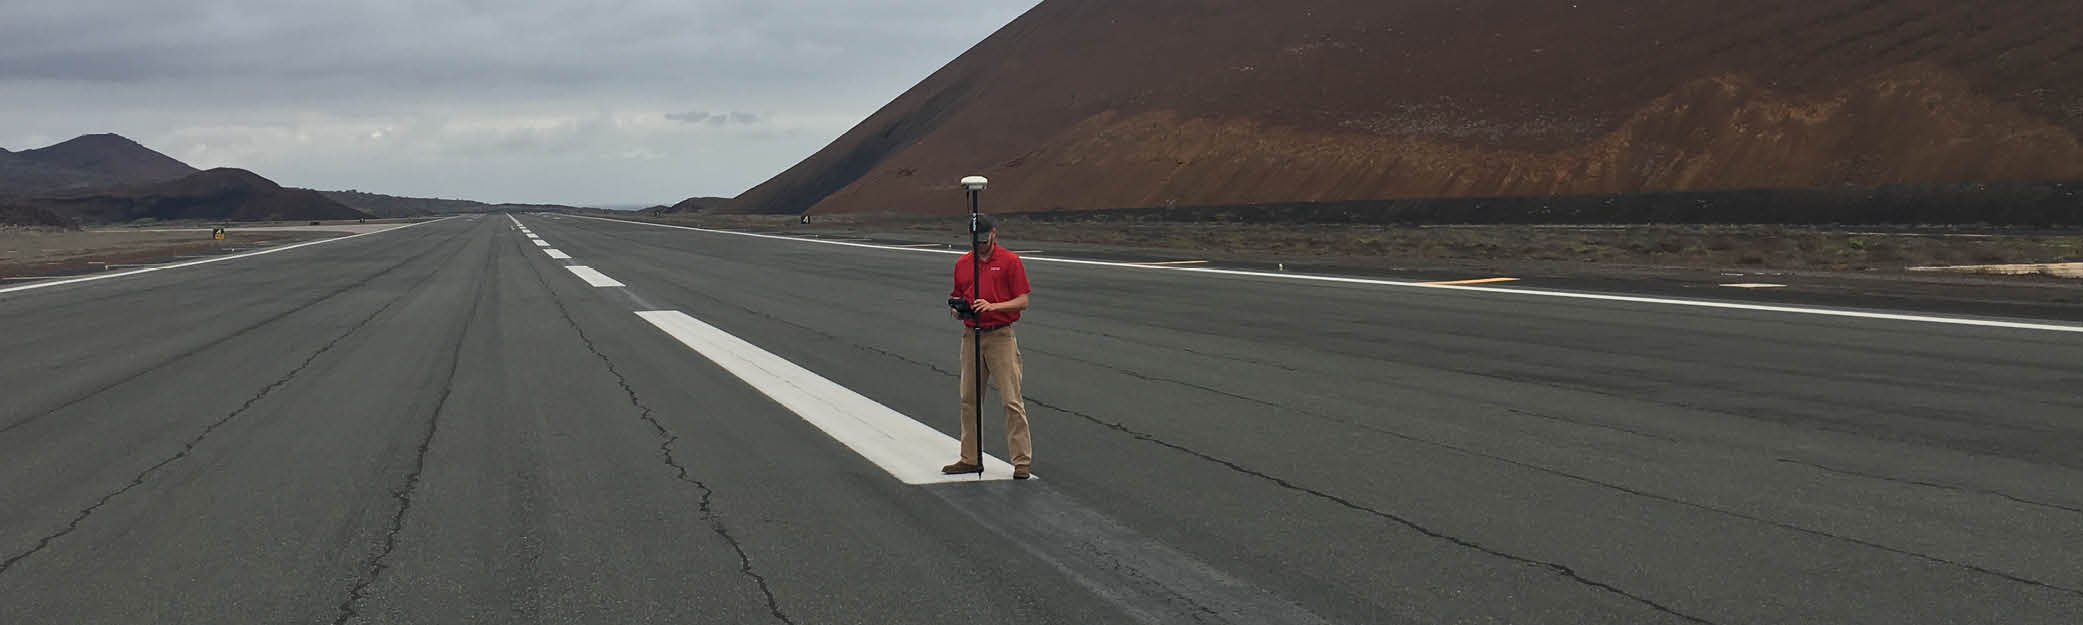 Ascension Island Runway Project Shines Spotlight on DRMP’s Federal Market Sector Capabilities 